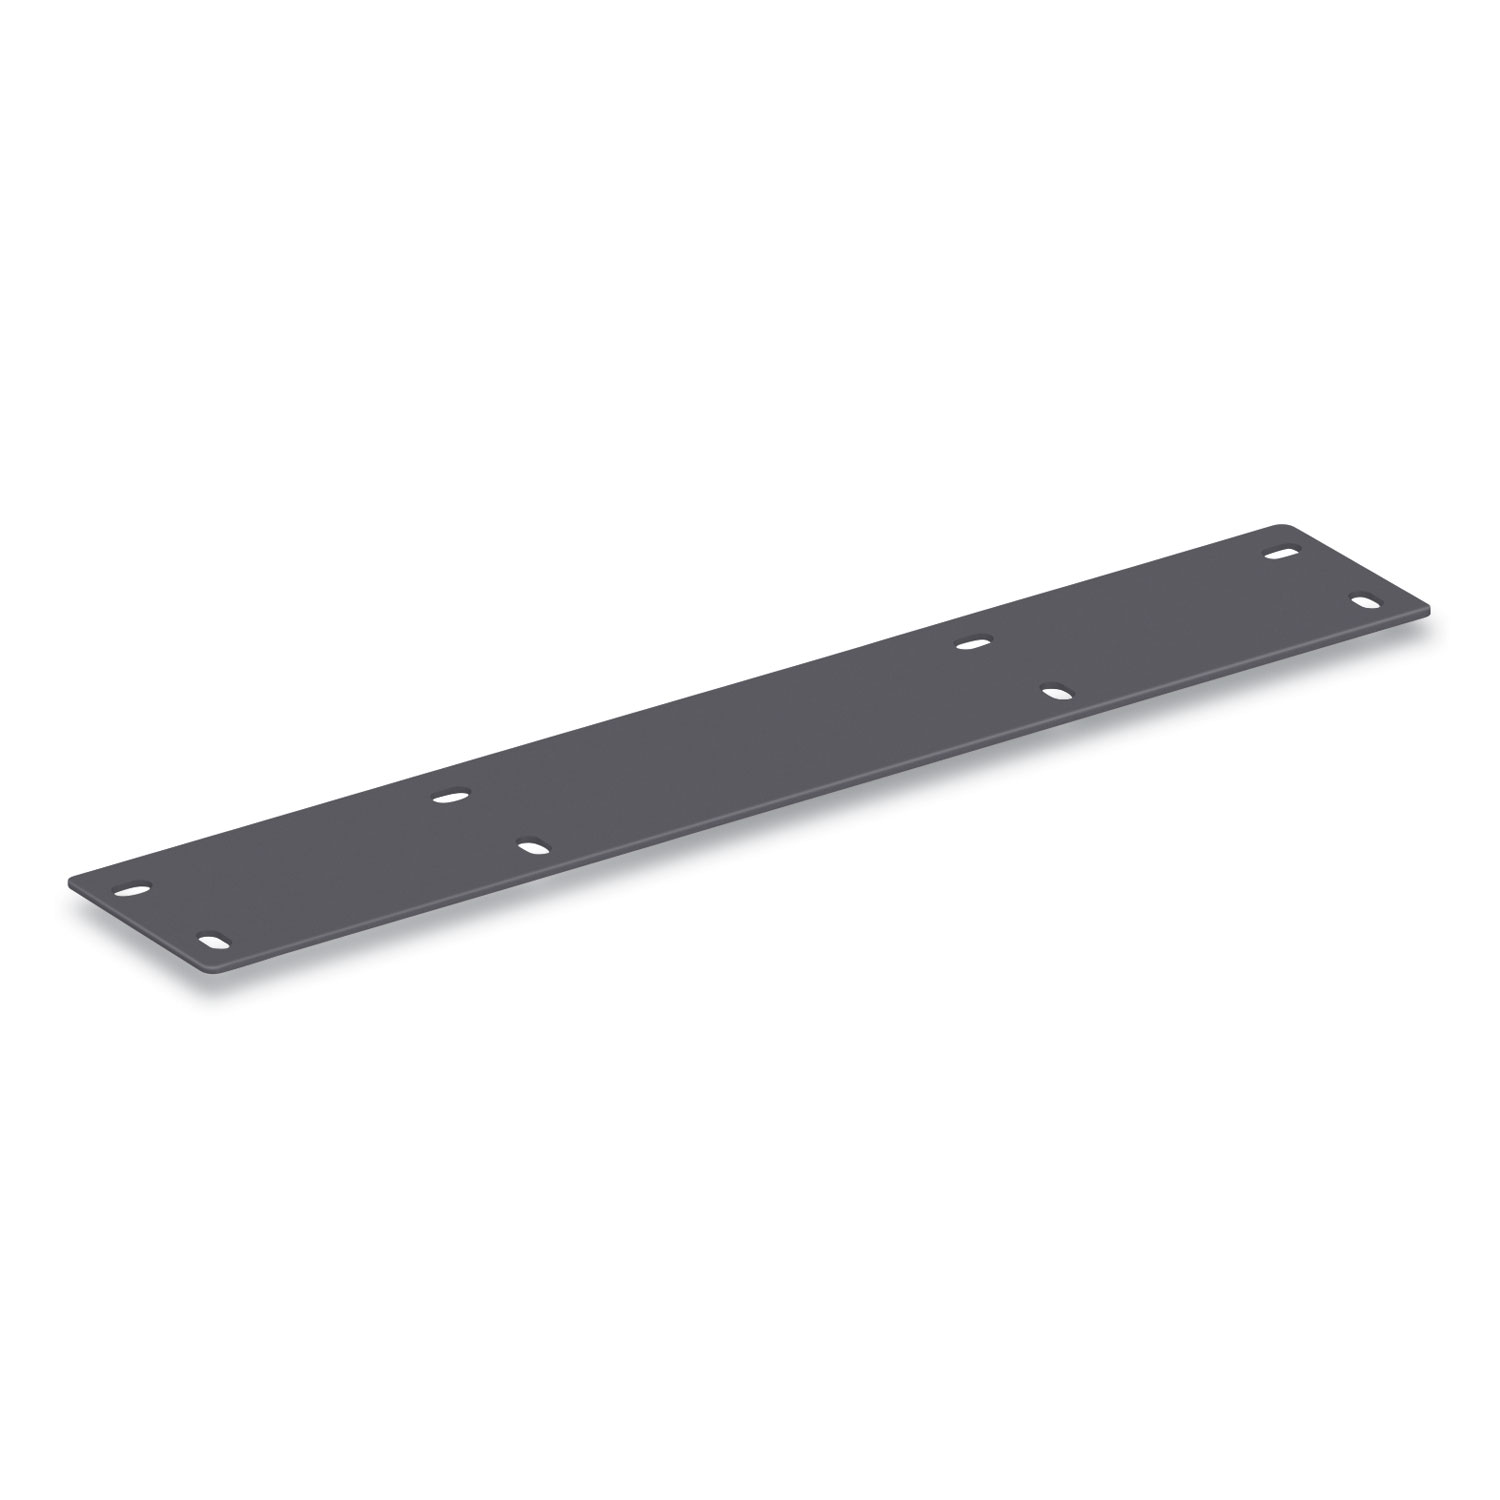  HON HONPLFB24 Mod Flat Bracket to Join 24d Worksurfaces to 30d Worksurfaces to Create an L-Station, Graphite (HONPLFB24) 